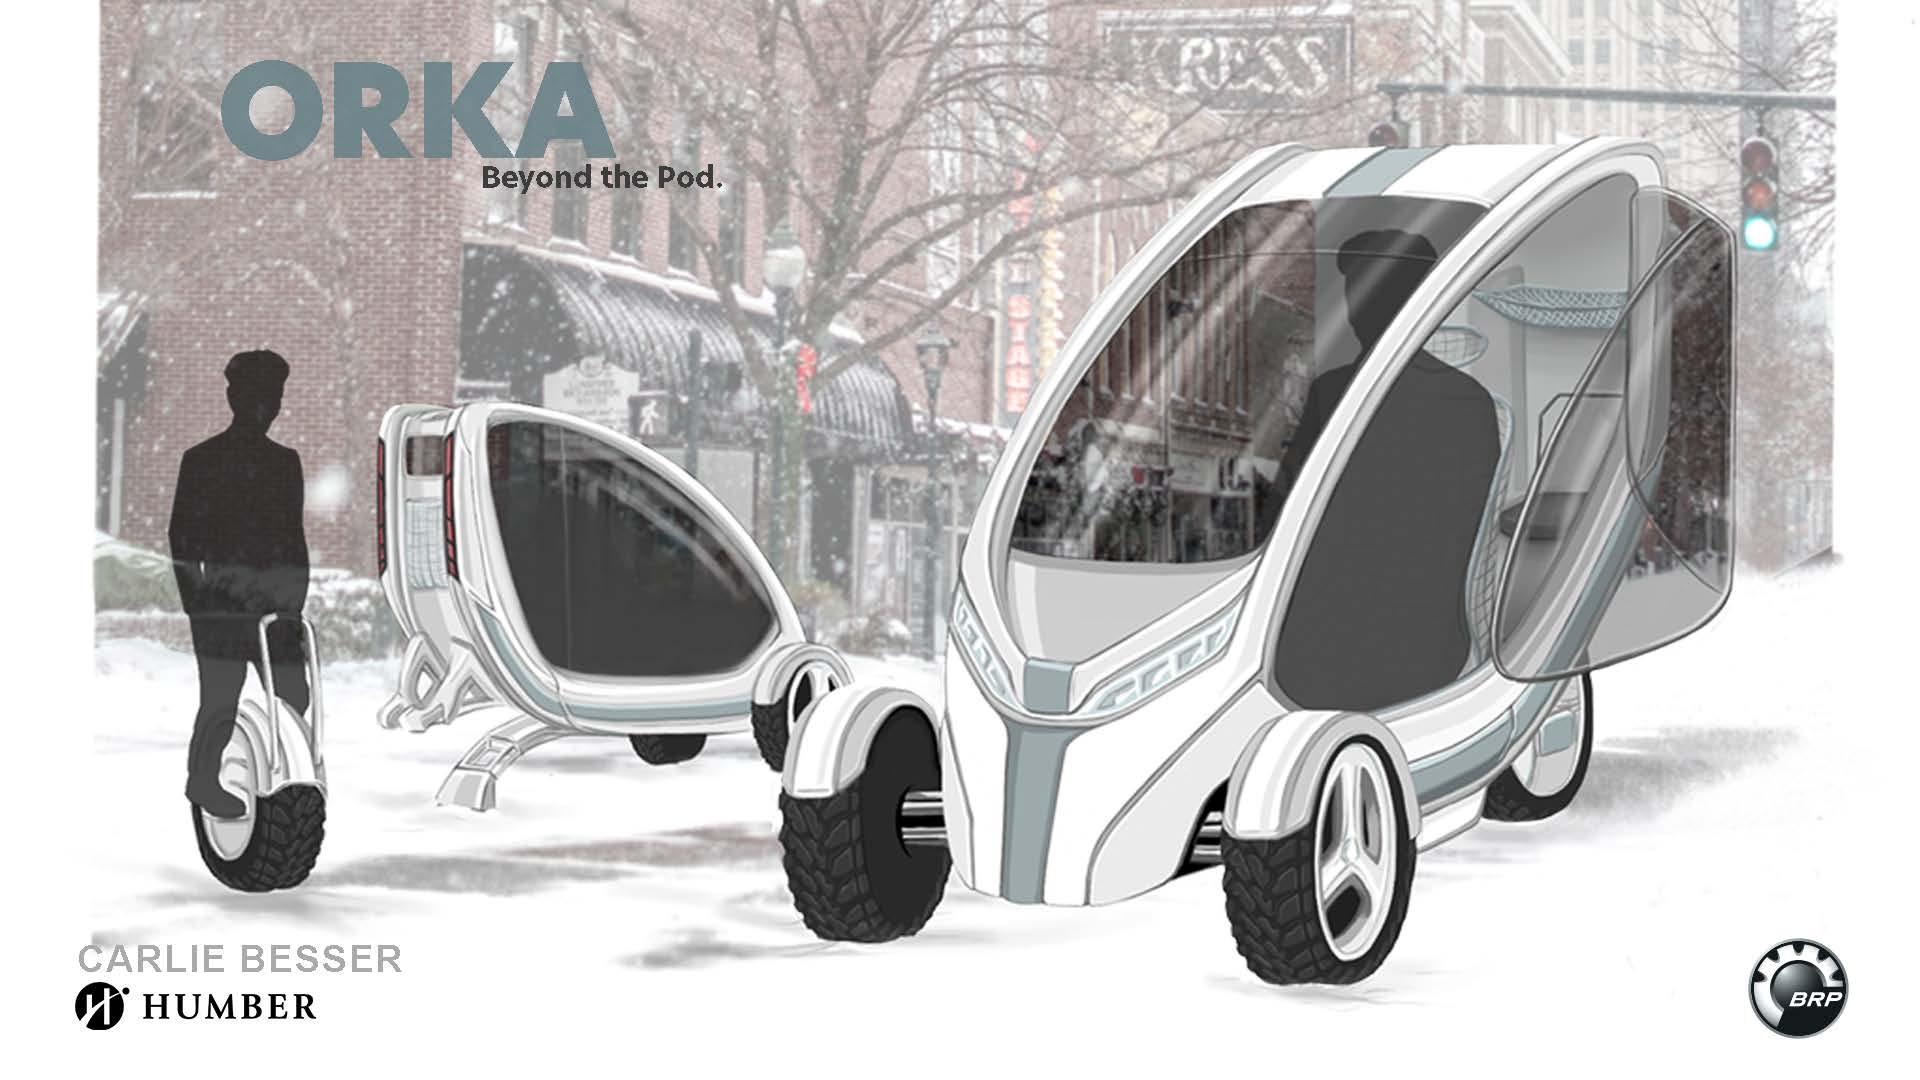 A conceptual design of a small vehicle for one person. The words ORKA Beyond the Pod are on the image.